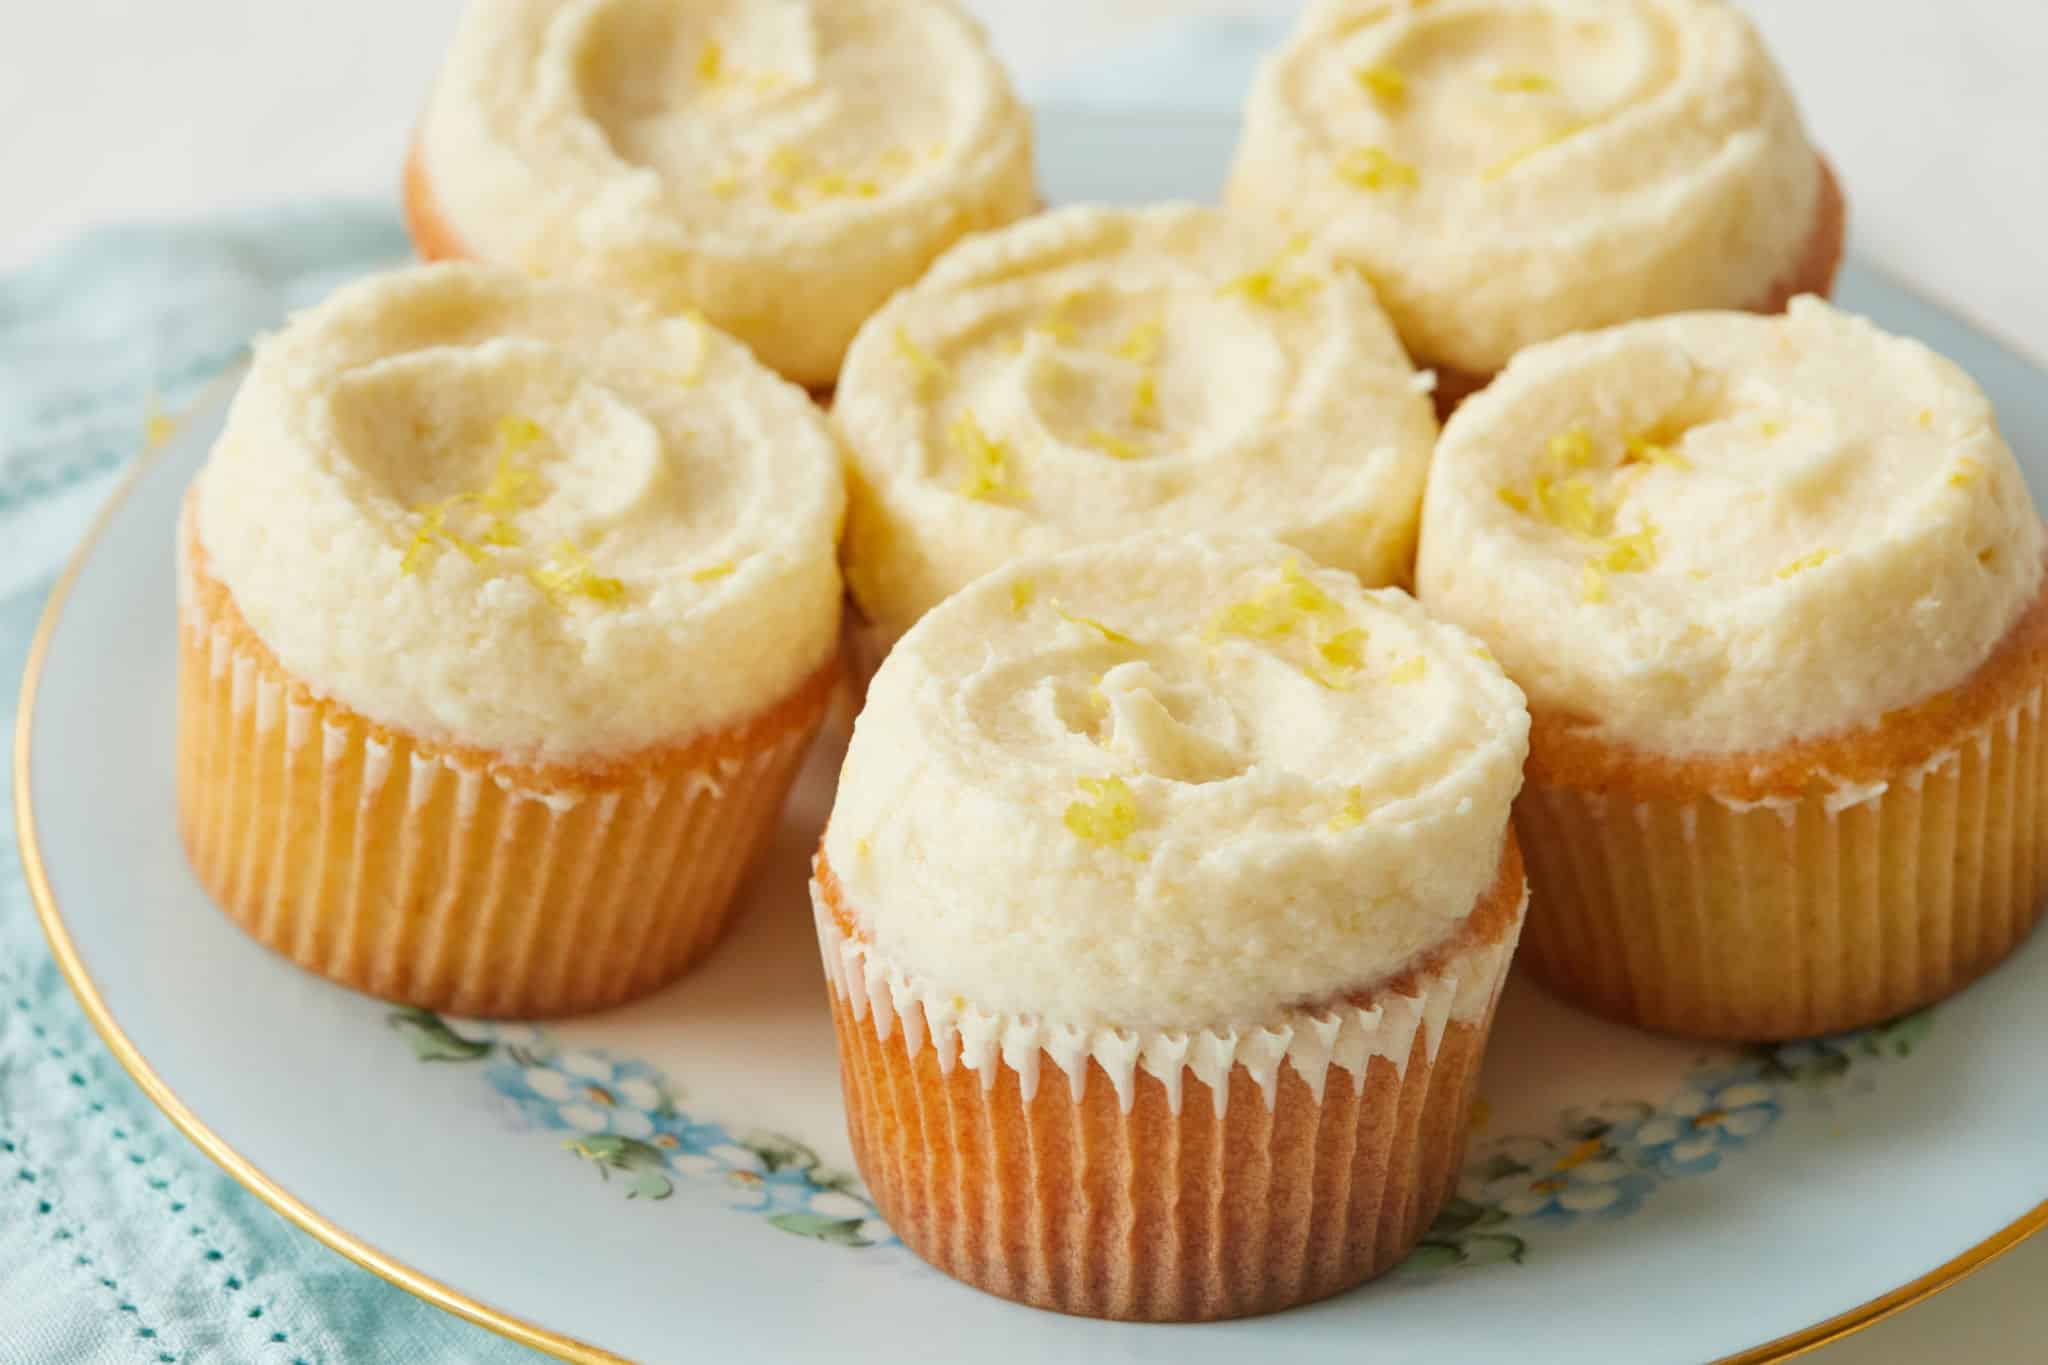 A plate of cupcakes with lemon ermine frosting.